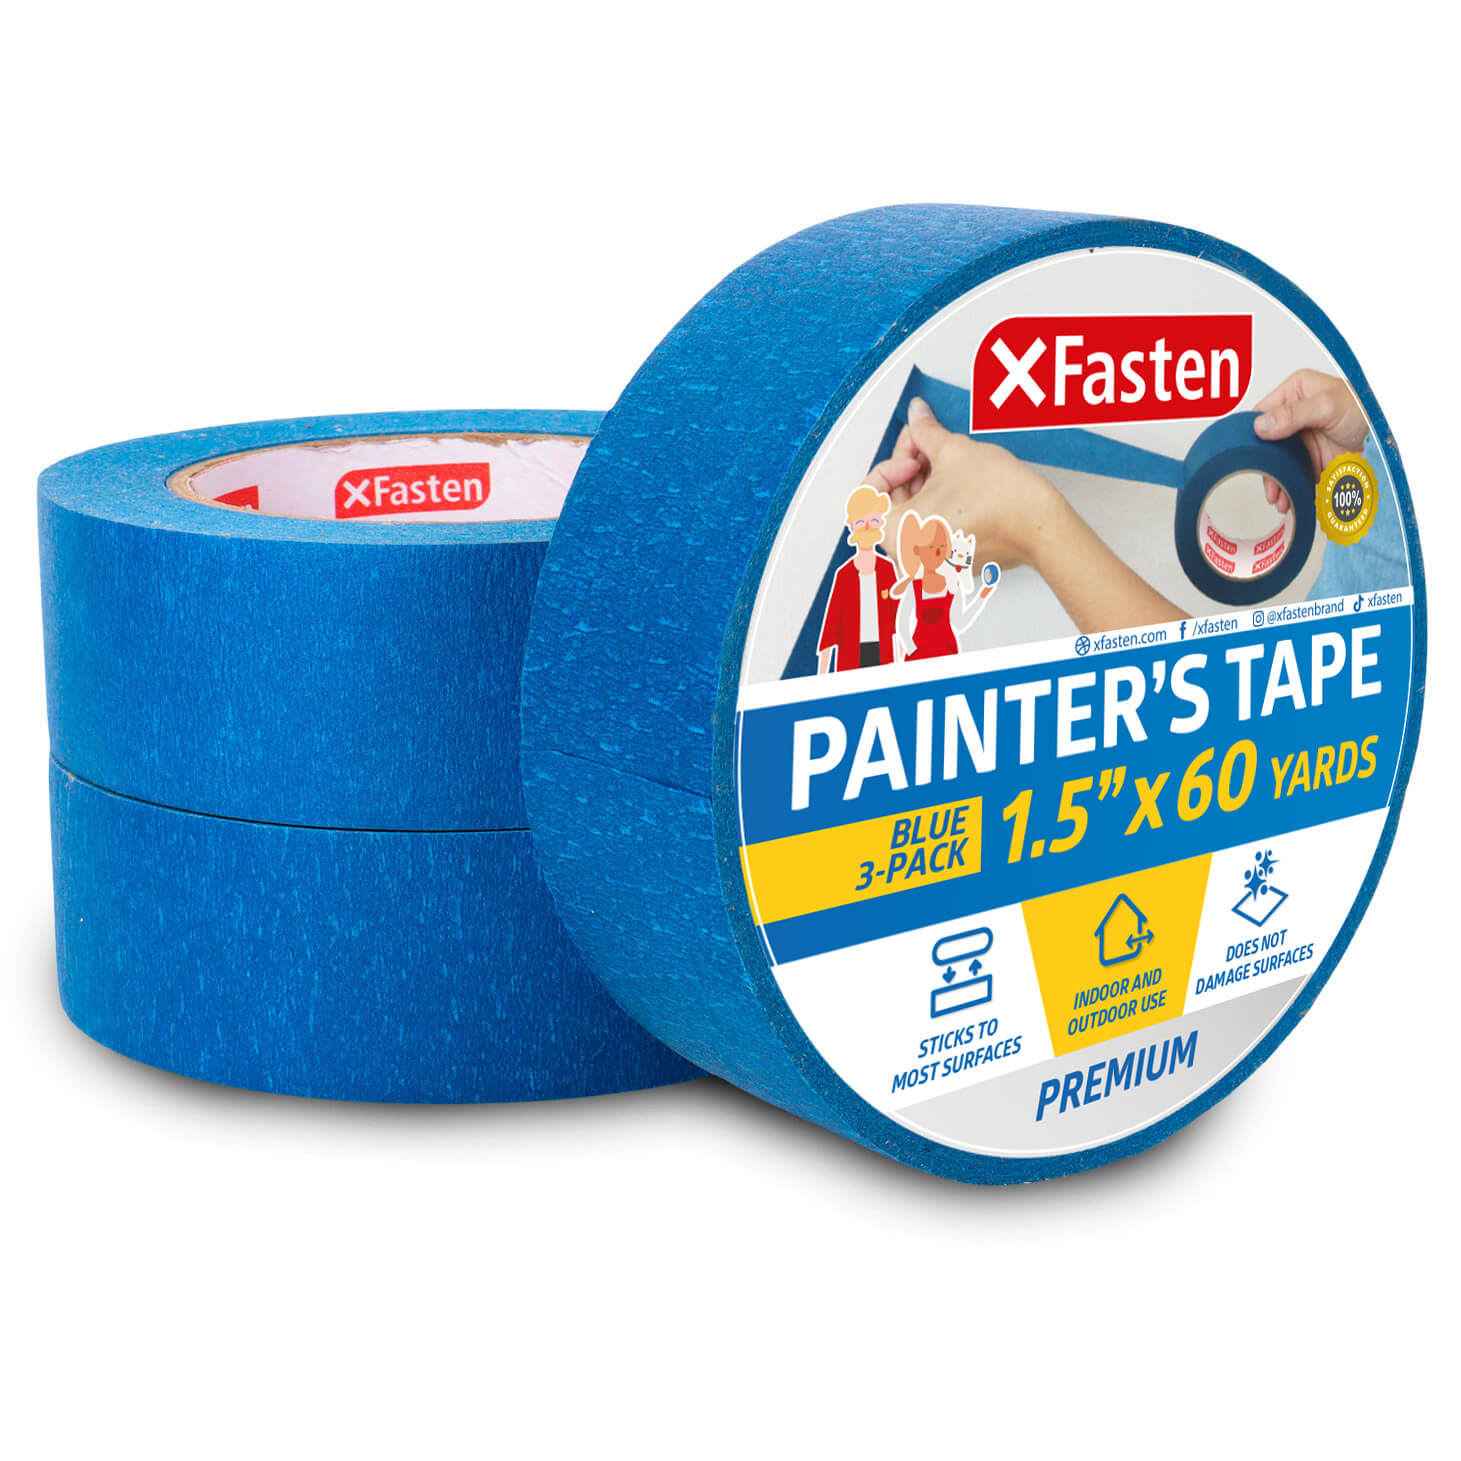 XFasten Professional Blue Painter's Tape | 1.5 Inch x 60 Yards | 3-Pack